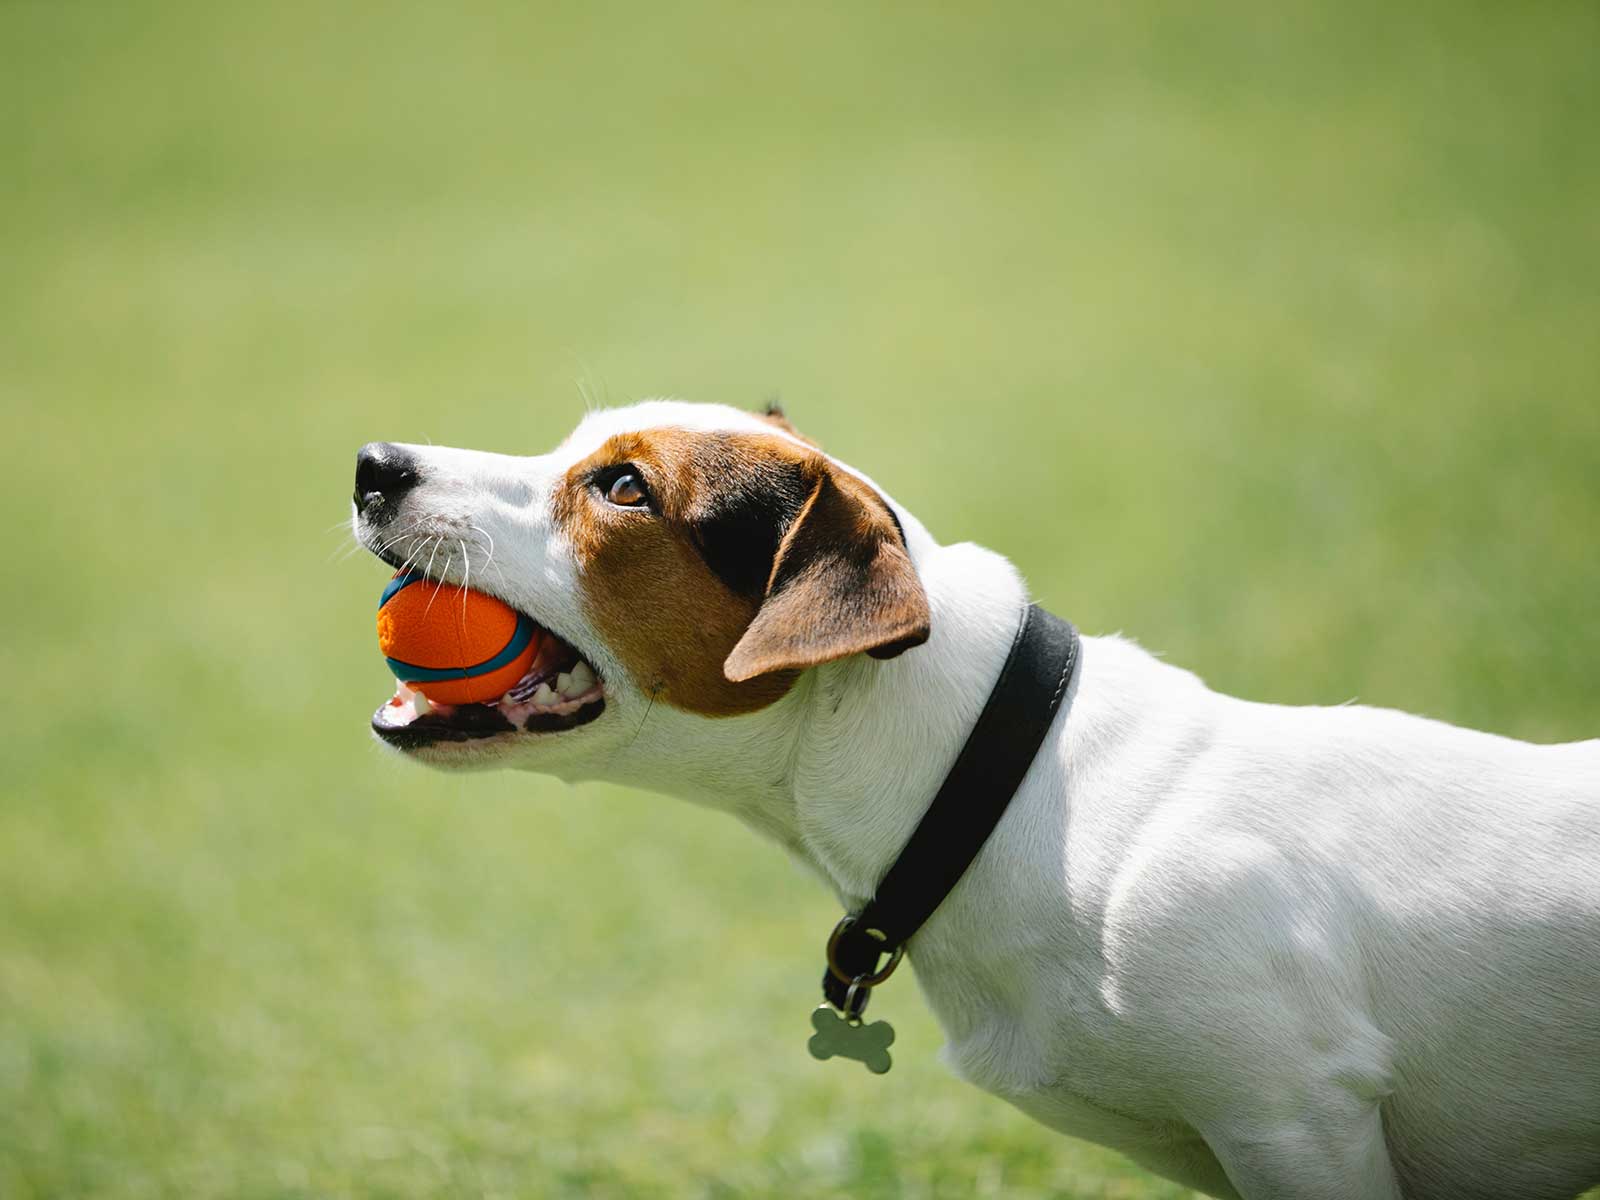 Jack Russell Terrier Holding Orange Ball In Its Mouth Outside